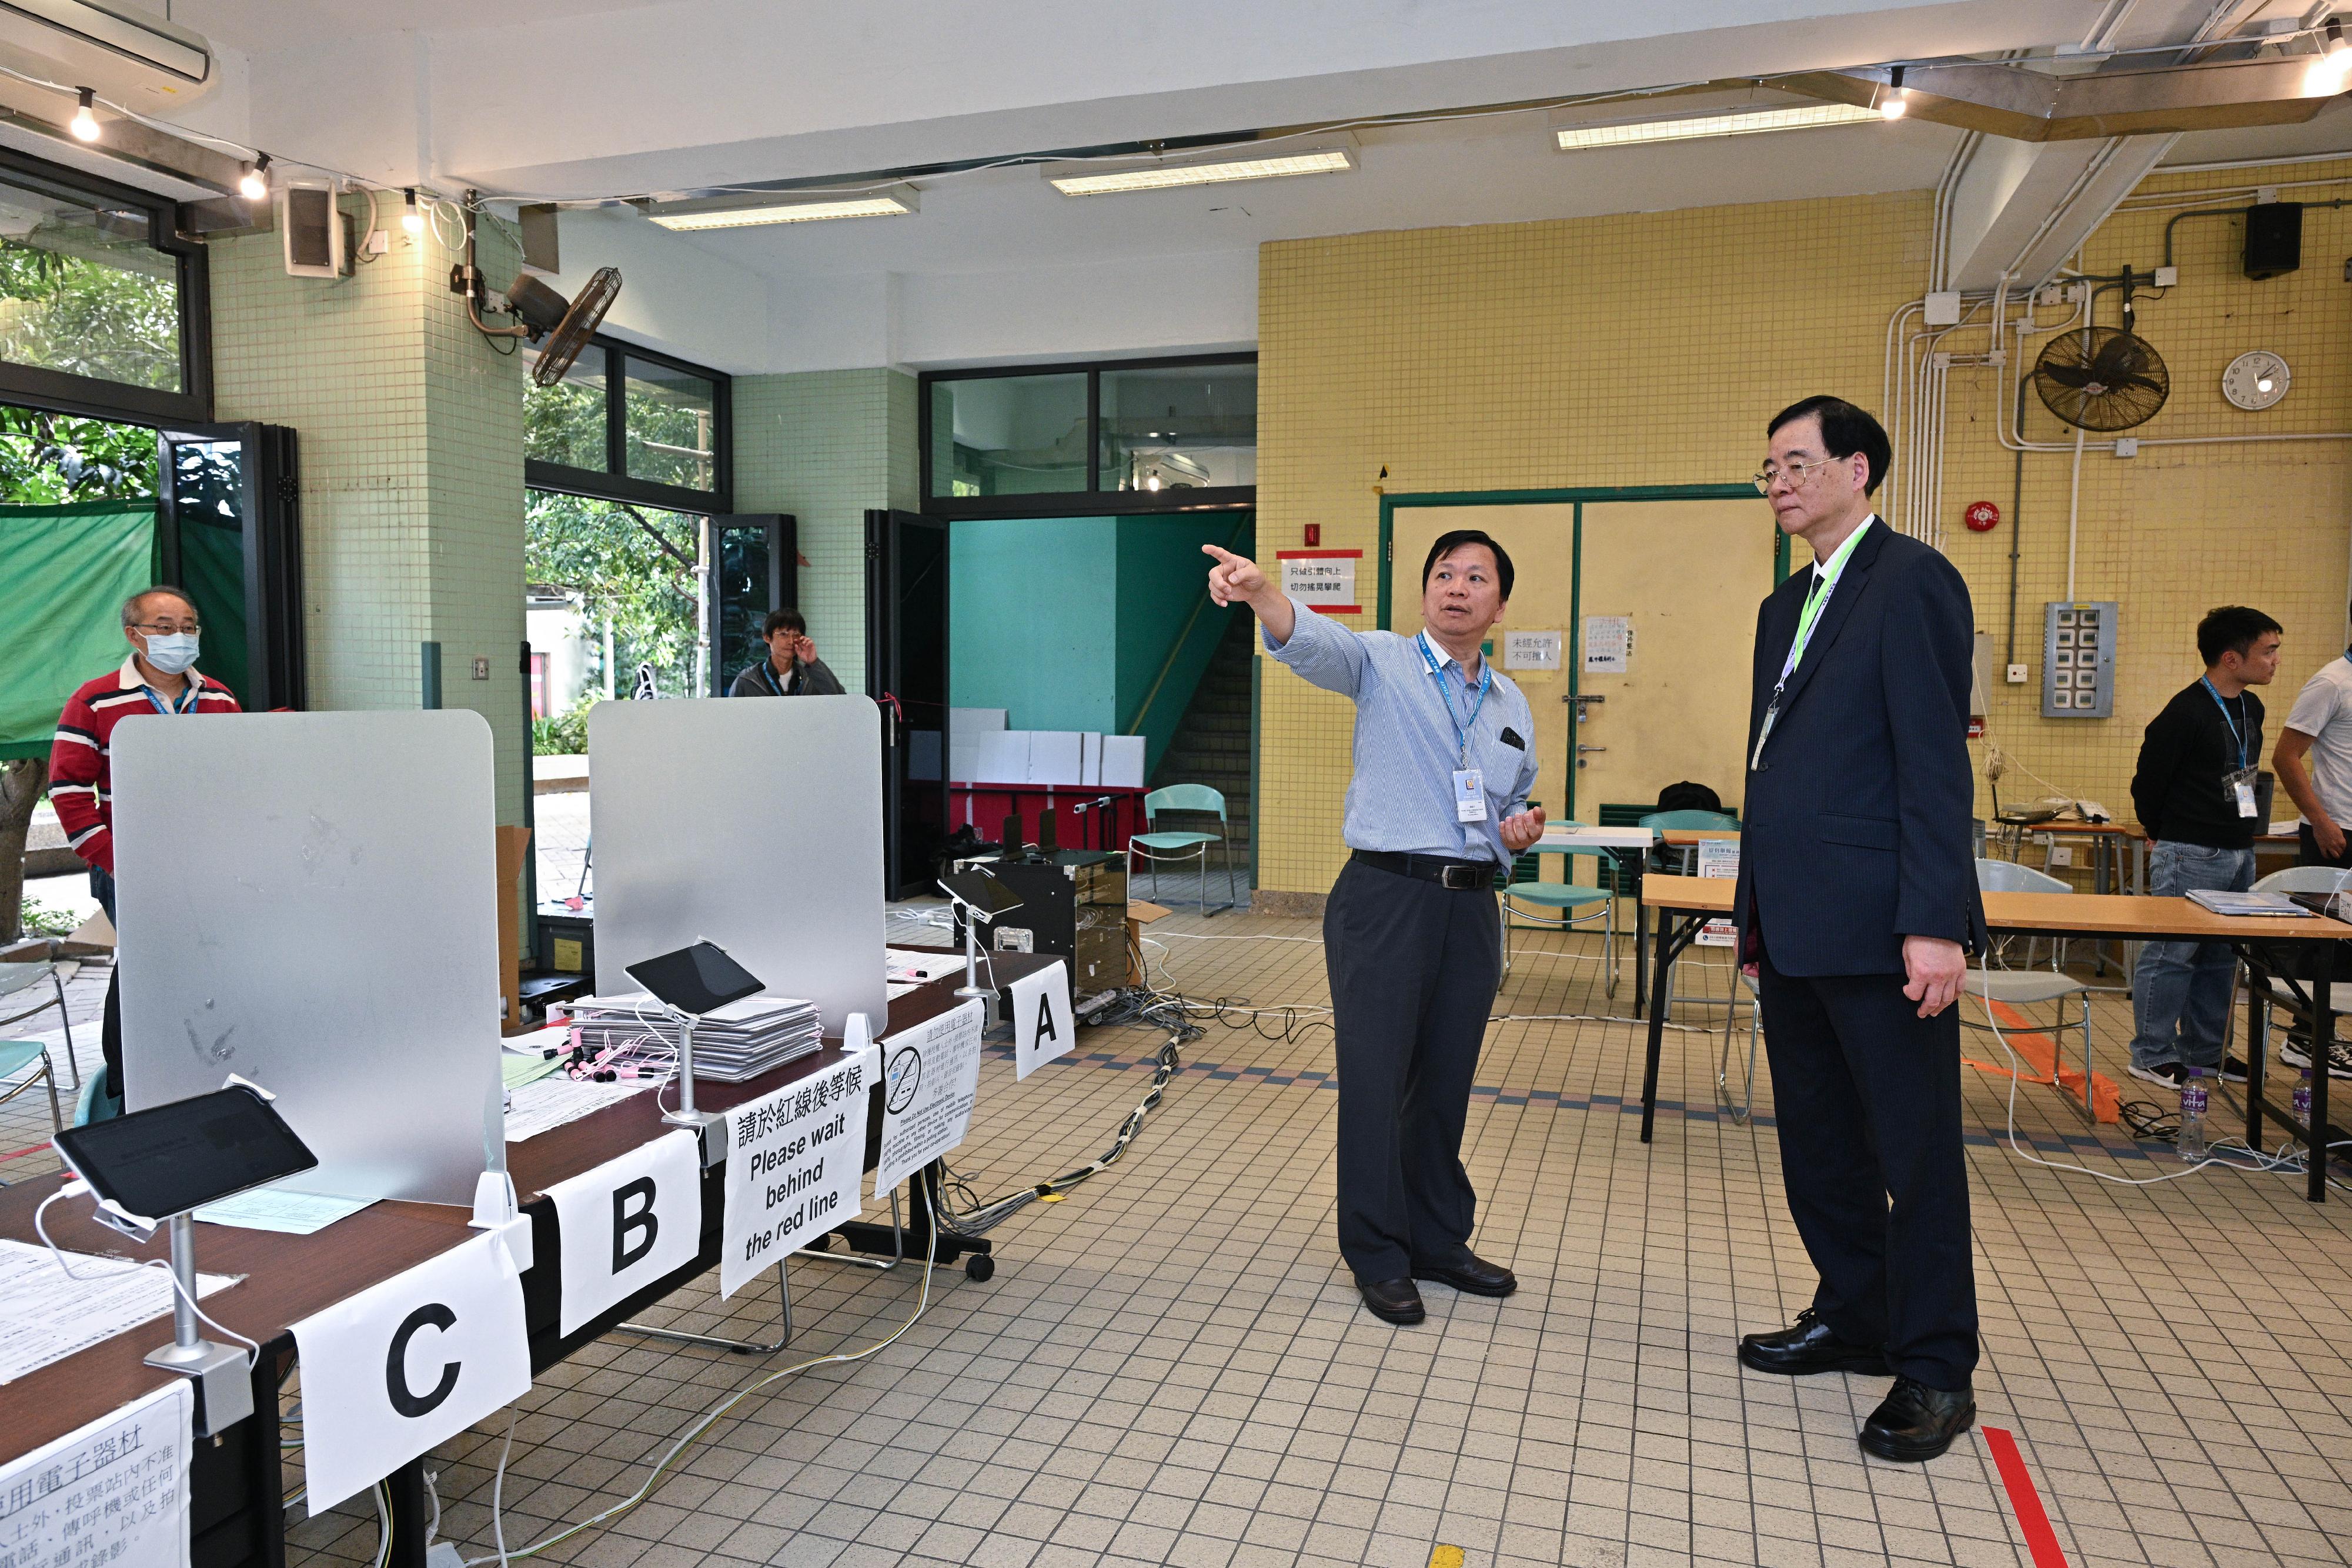 The Electoral Affairs Commission member Professor Daniel Shek (front row, right) visits the District Council geographical constituency polling station of the 2023 District Council Ordinary Election at Yan Chai Hospital Law Chan Chor Si College this afternoon (December 10) to inspect the operation of the polling station. He is being briefed by the Presiding Officer.